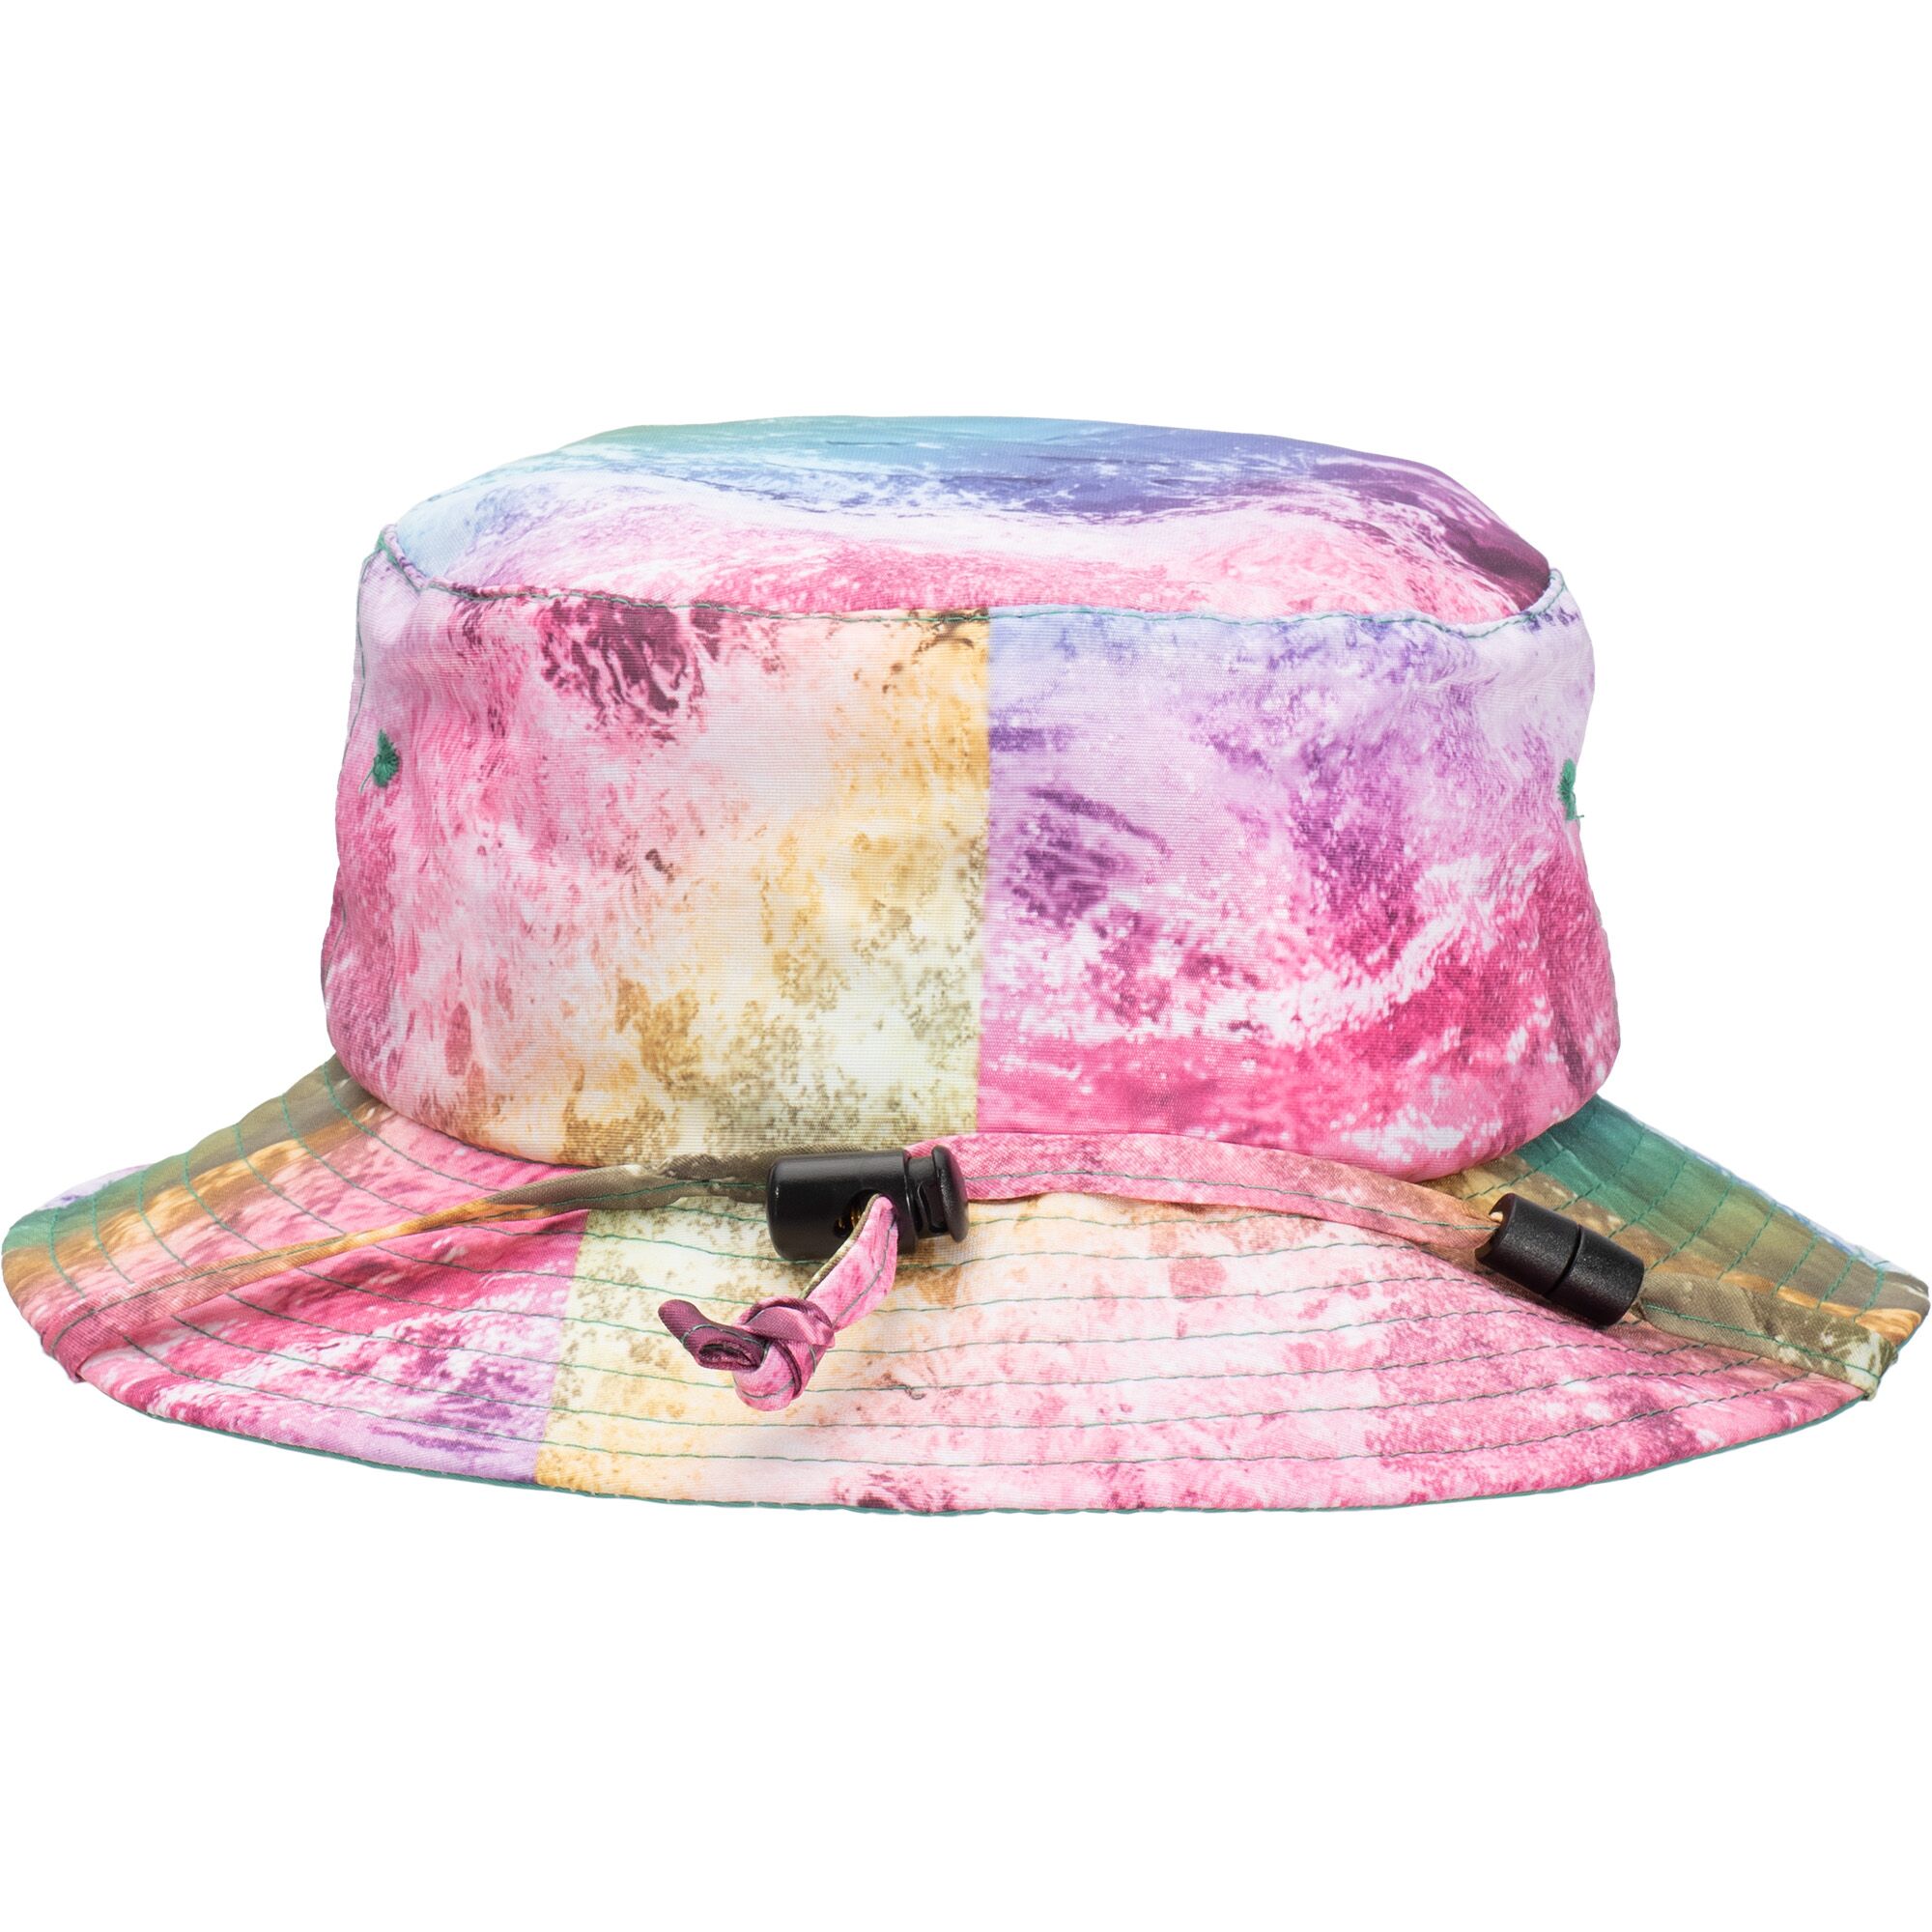 Youth Tie Dyed Bucket Hat - Sizes M-L